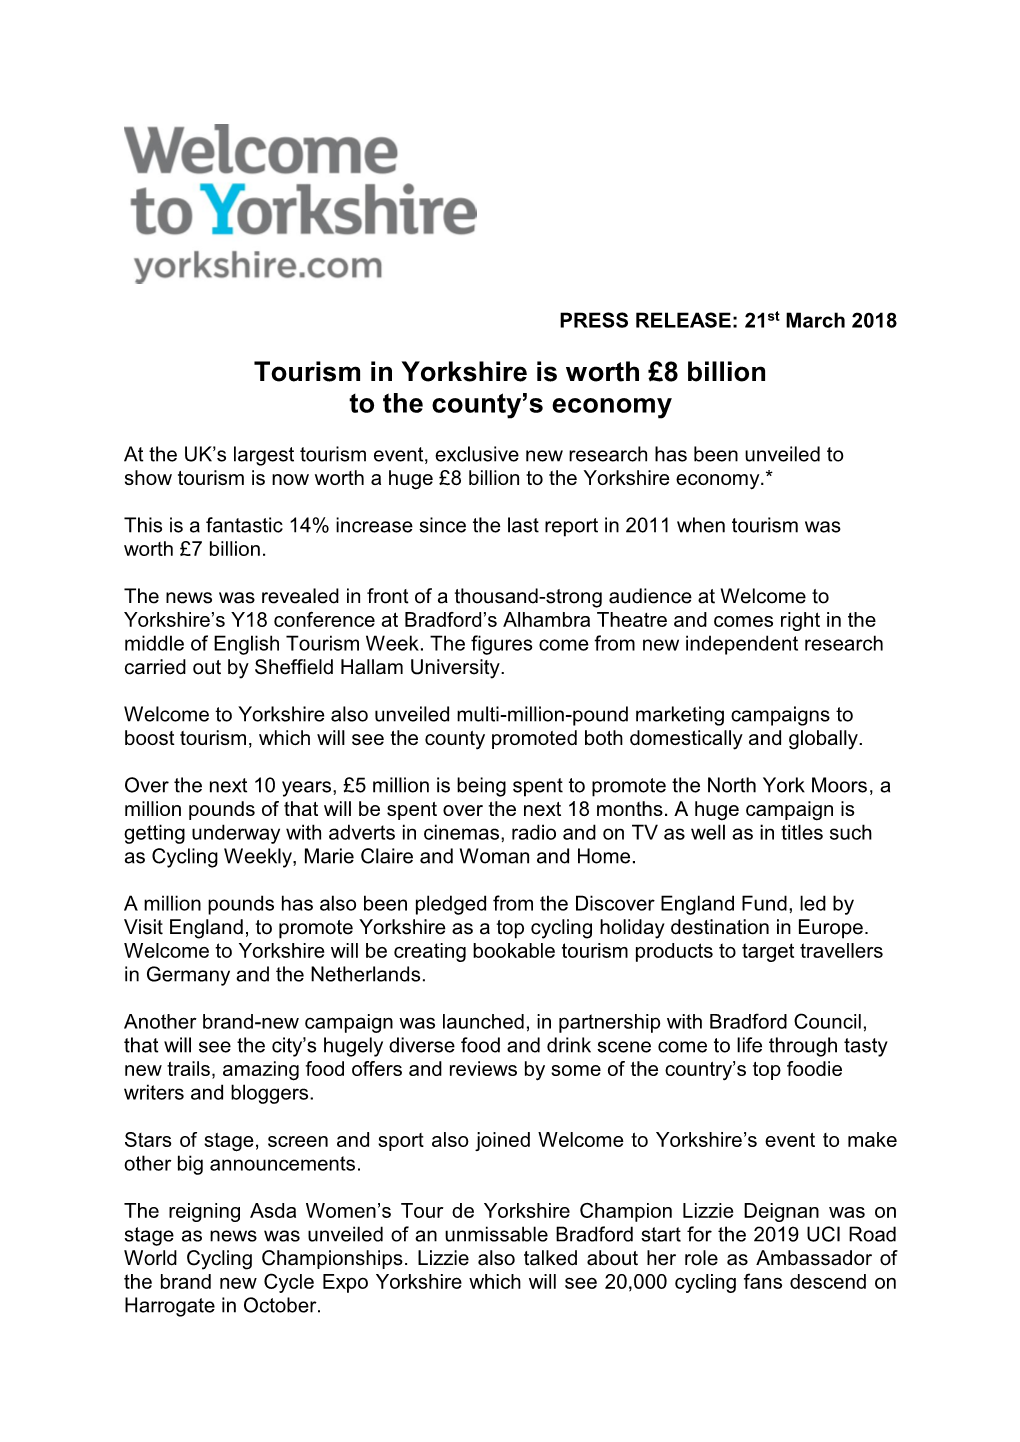 Tourism in Yorkshire Is Worth £8 Billion to the County's Economy